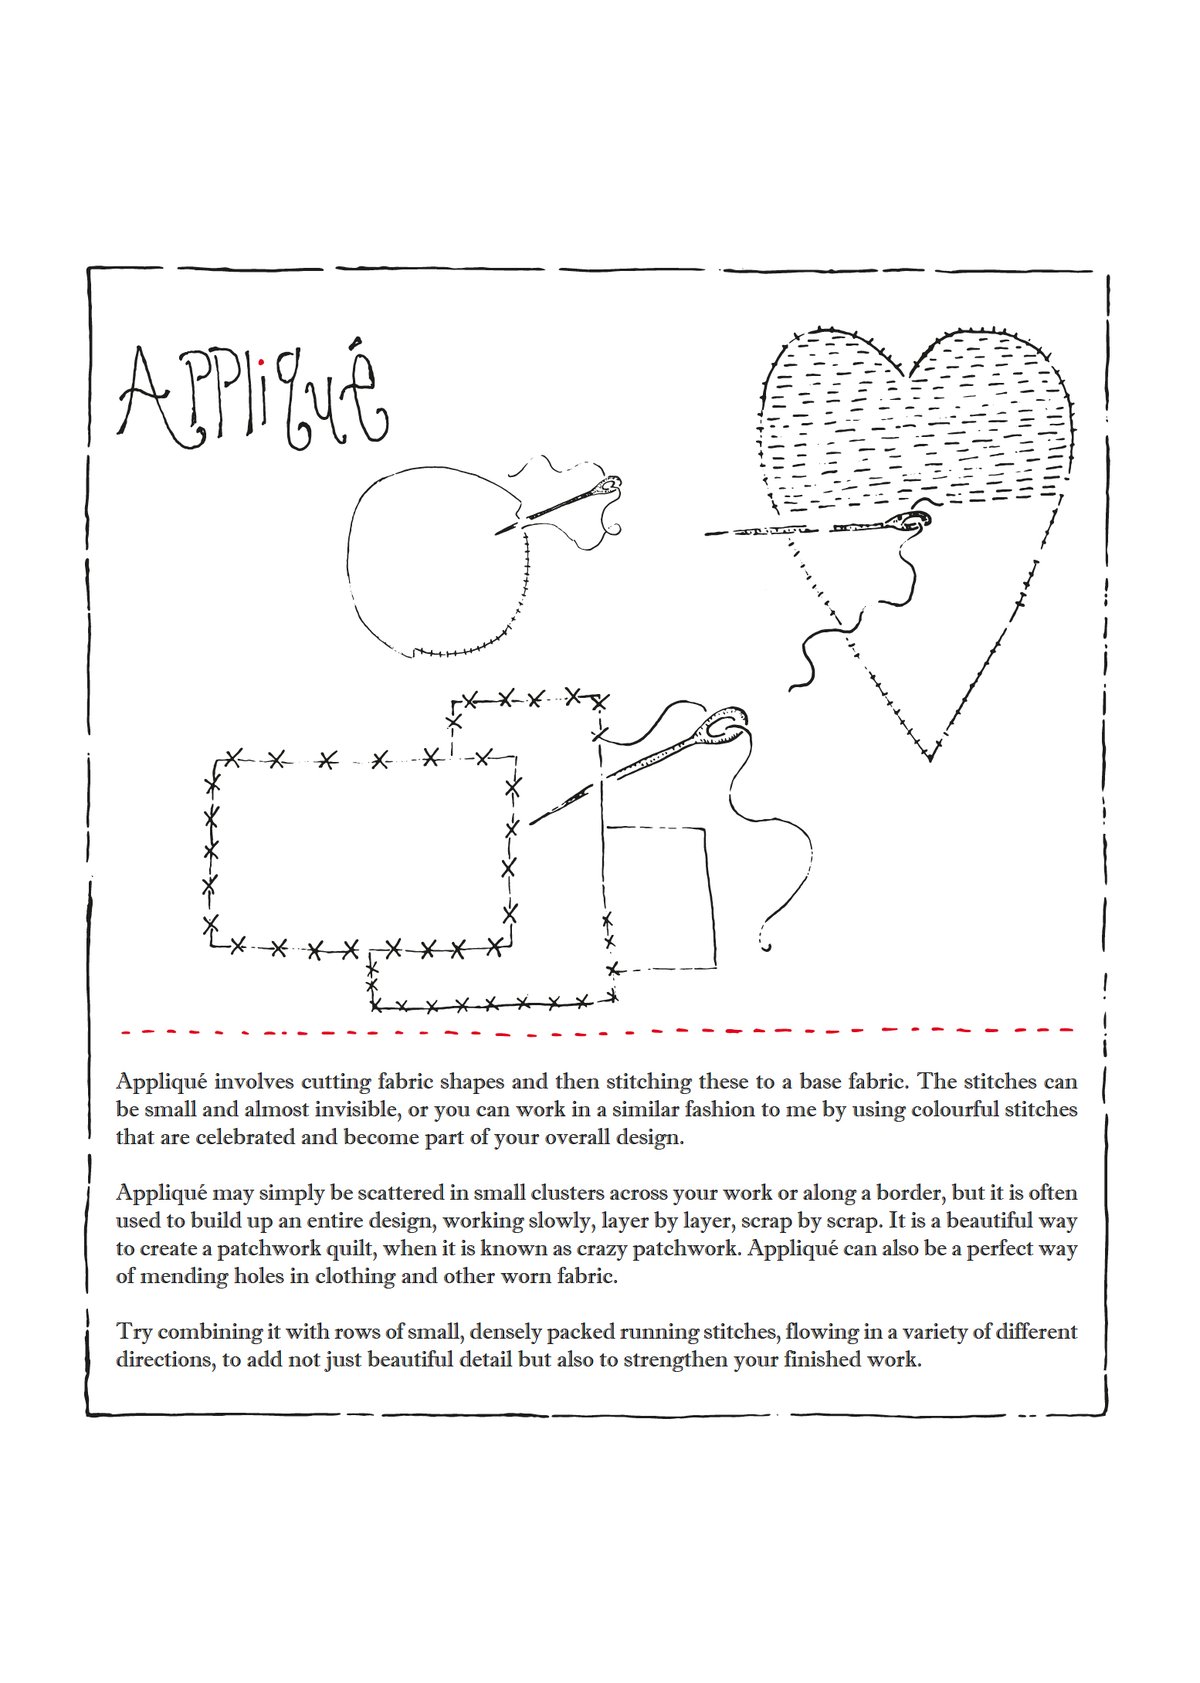 Image of Stitch and Appliqué Guide (Digital Instructions)